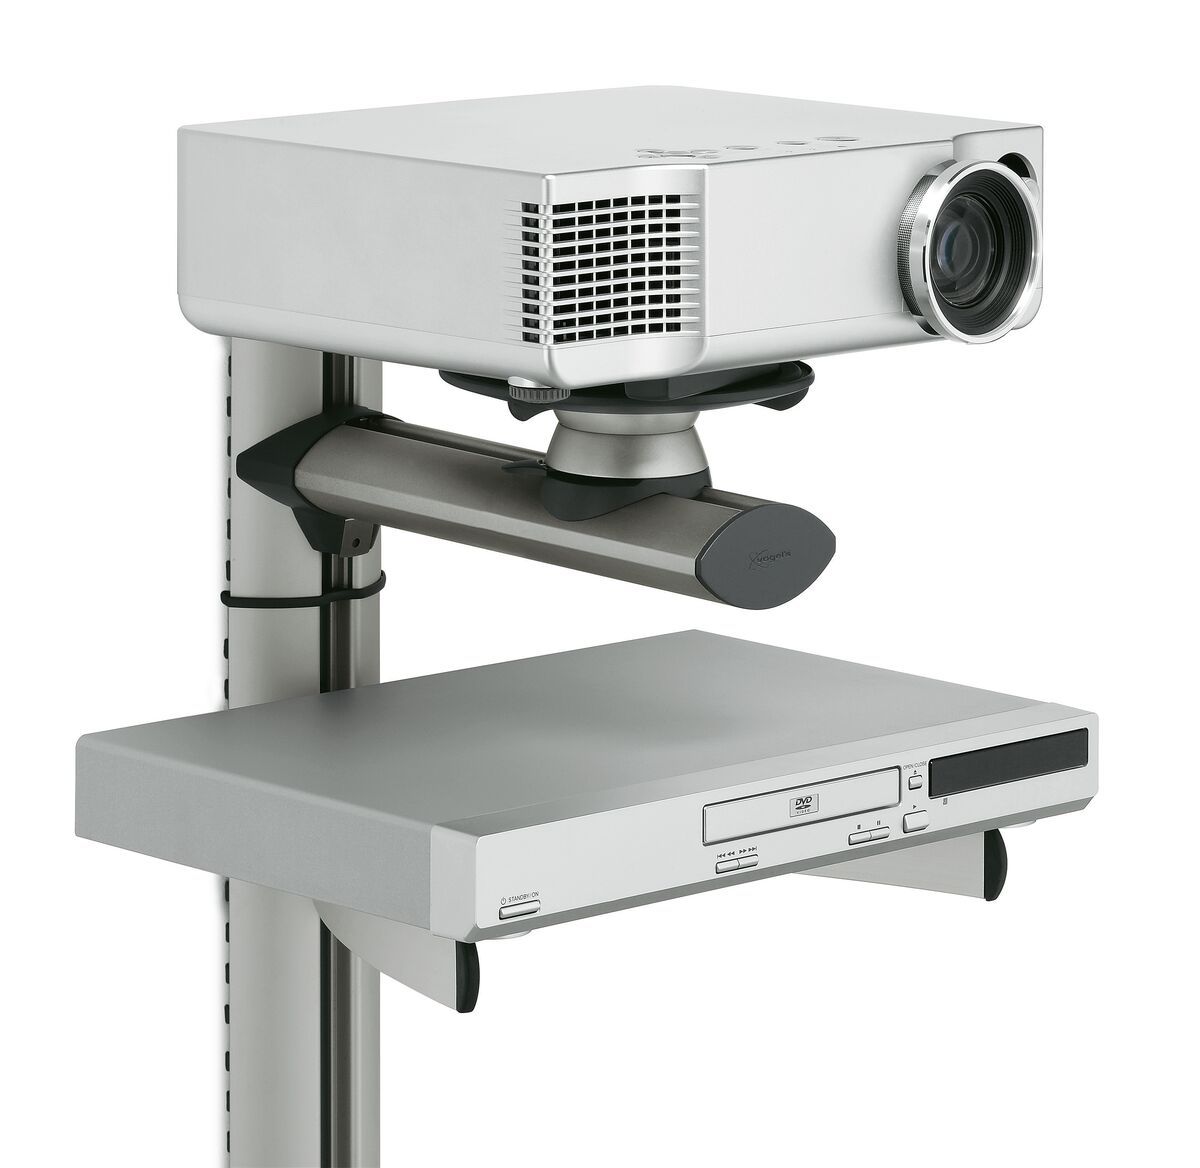 Vogel's EPW 6565 Projector Wall Mount - Charge maximale : Application